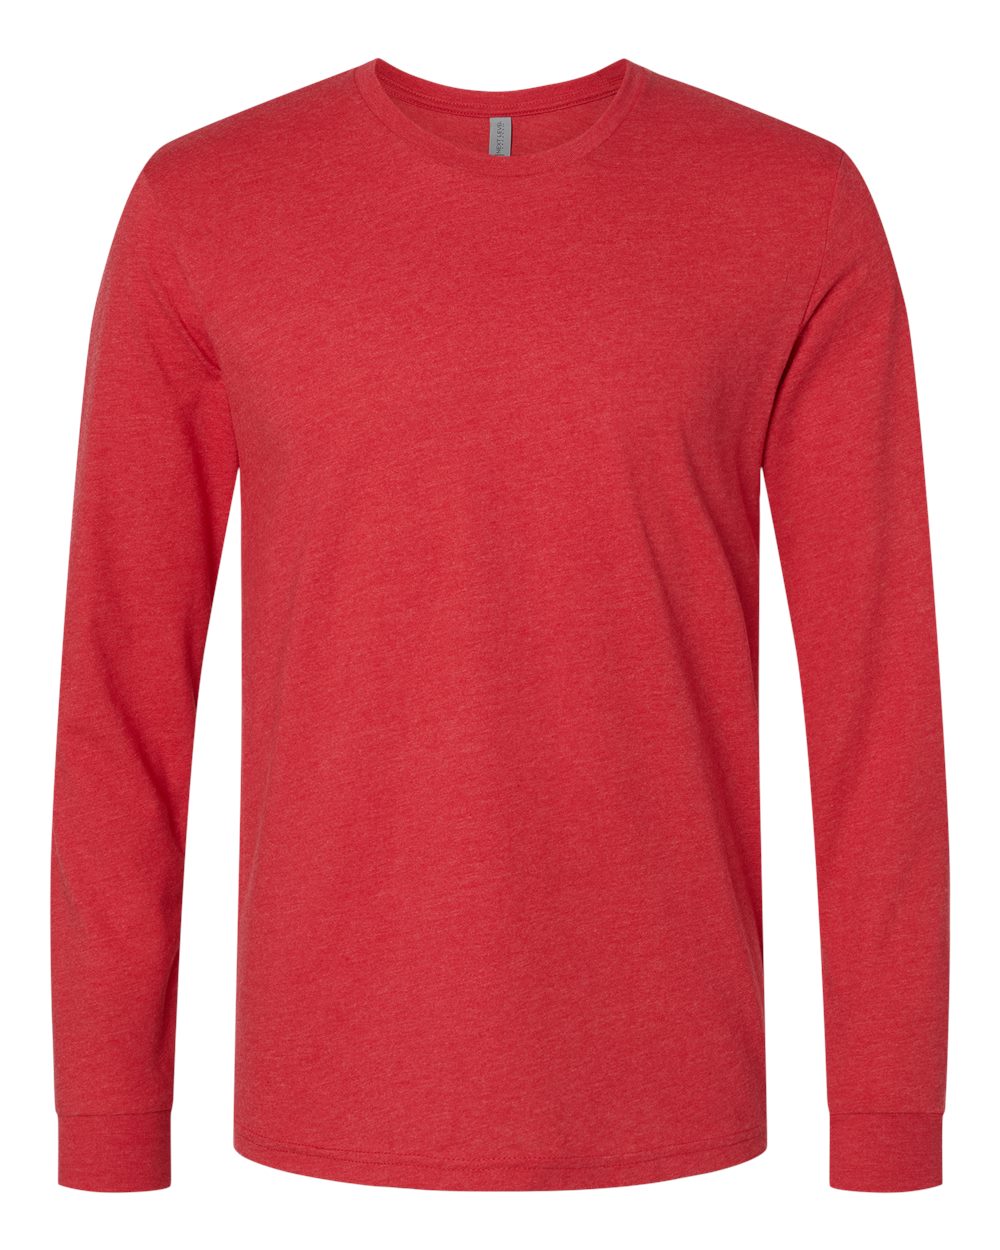 Next Level CVC Long Sleeve (6211) in Red